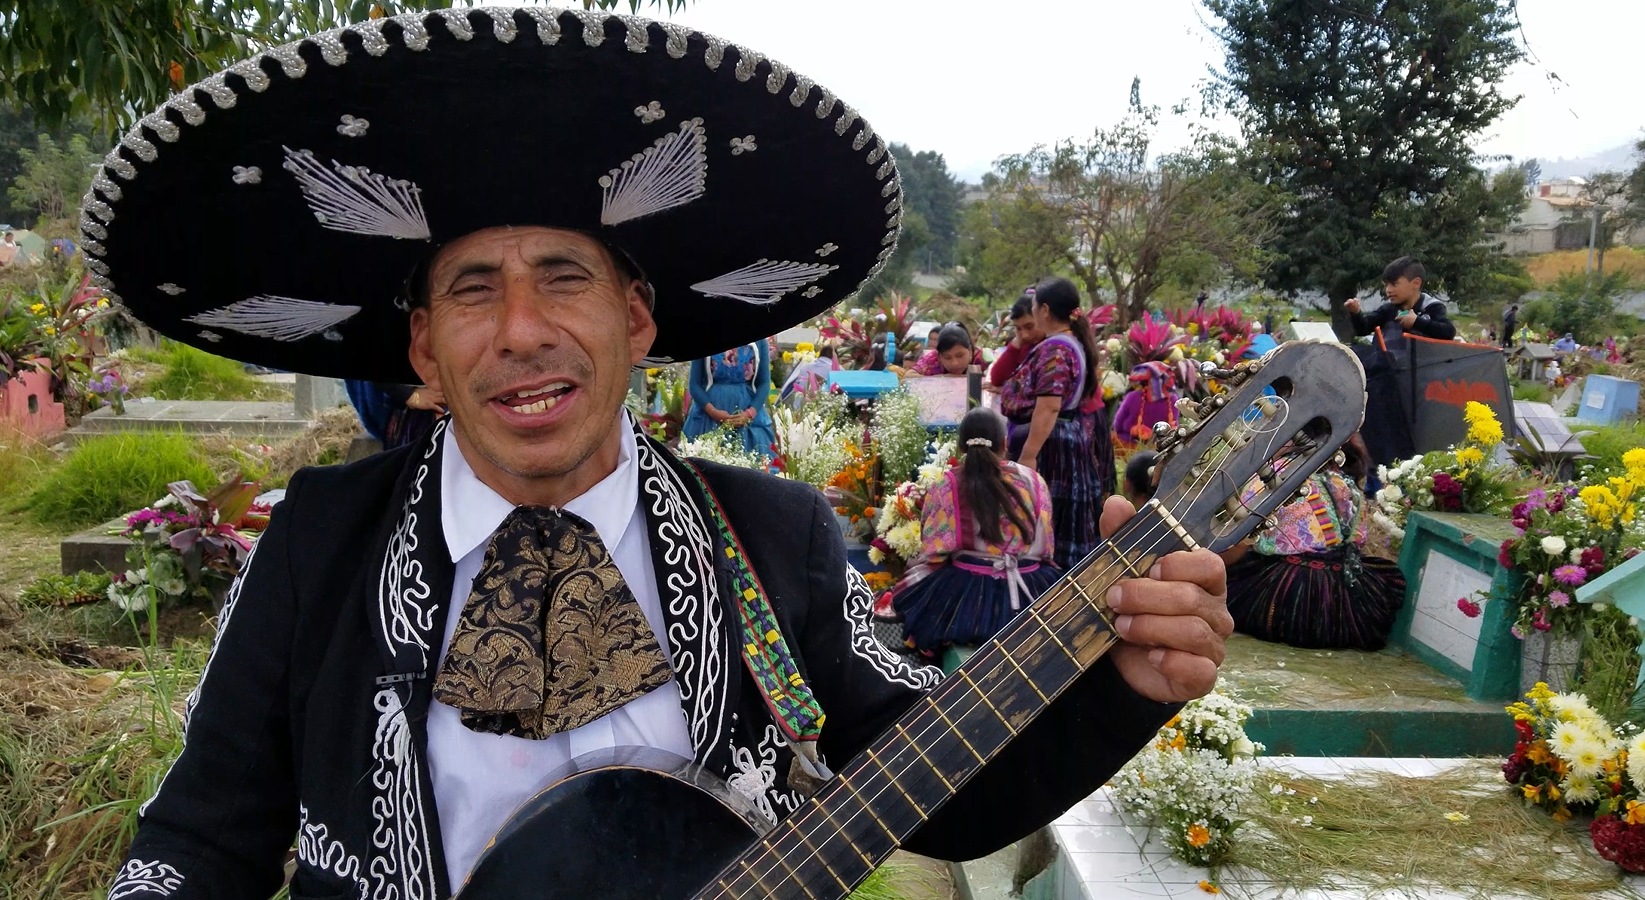 Local singer Roberto Cepeda, 65, has been playing his acoustic guitar since the age of 13. On Nov. 2, 2018, he dressed up in a traditional black Mexican mariachi suit to serenade the living and the dead during the annual Dia de los Muertos, also known as Dia de los Difuntos in Quetzaltenango (Xelaju), Guatemala's municipal cemetery.  Image by Kristian Hernandez. Guatemala, 2018.